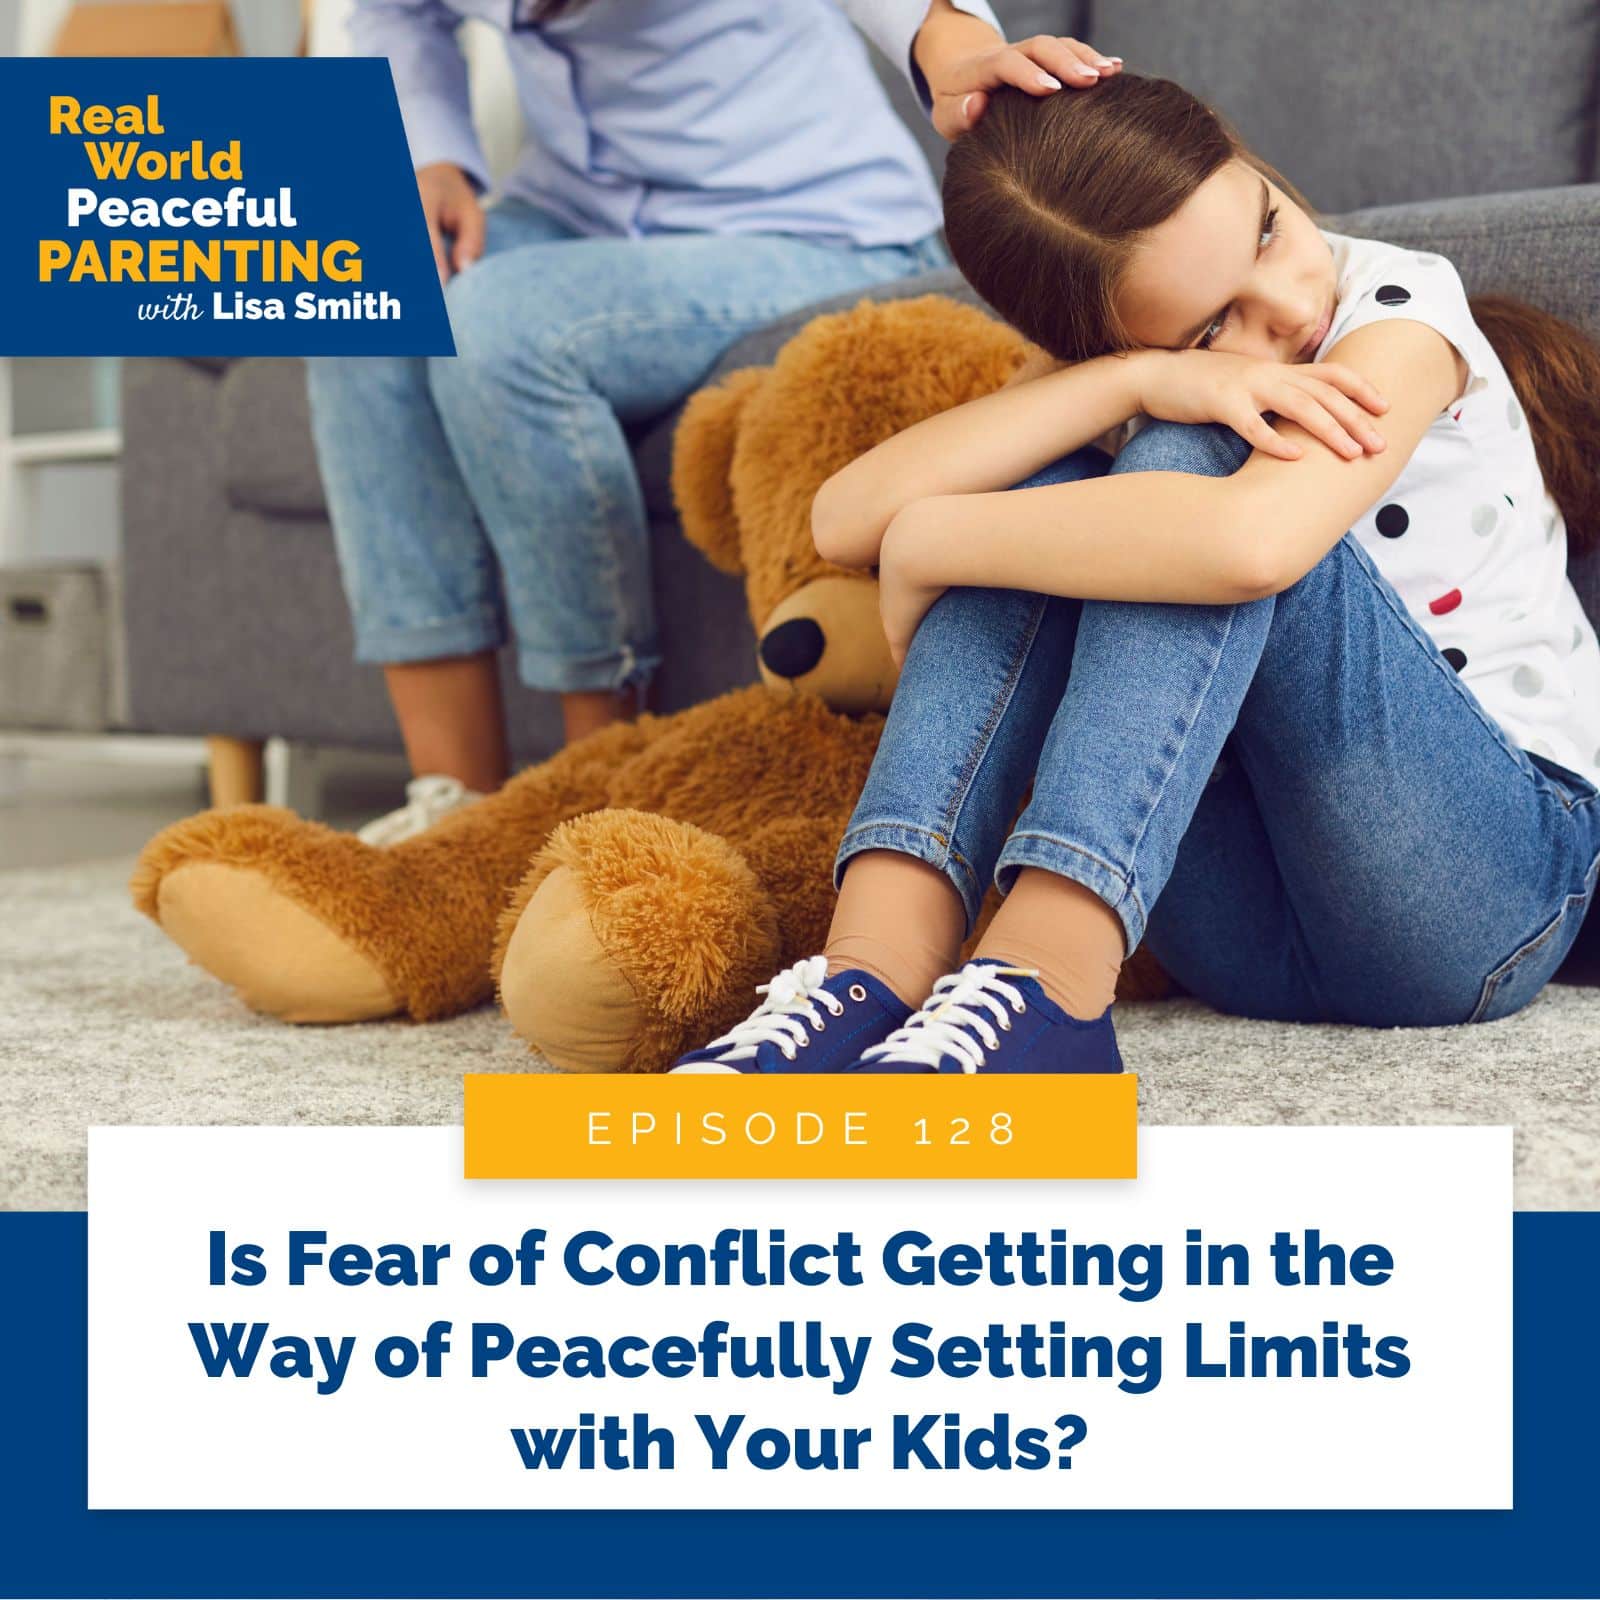 Real World Peaceful Parenting Lisa Smith | Is Fear of Conflict Getting in the Way of Peacefully Setting Limits with Your Kids?